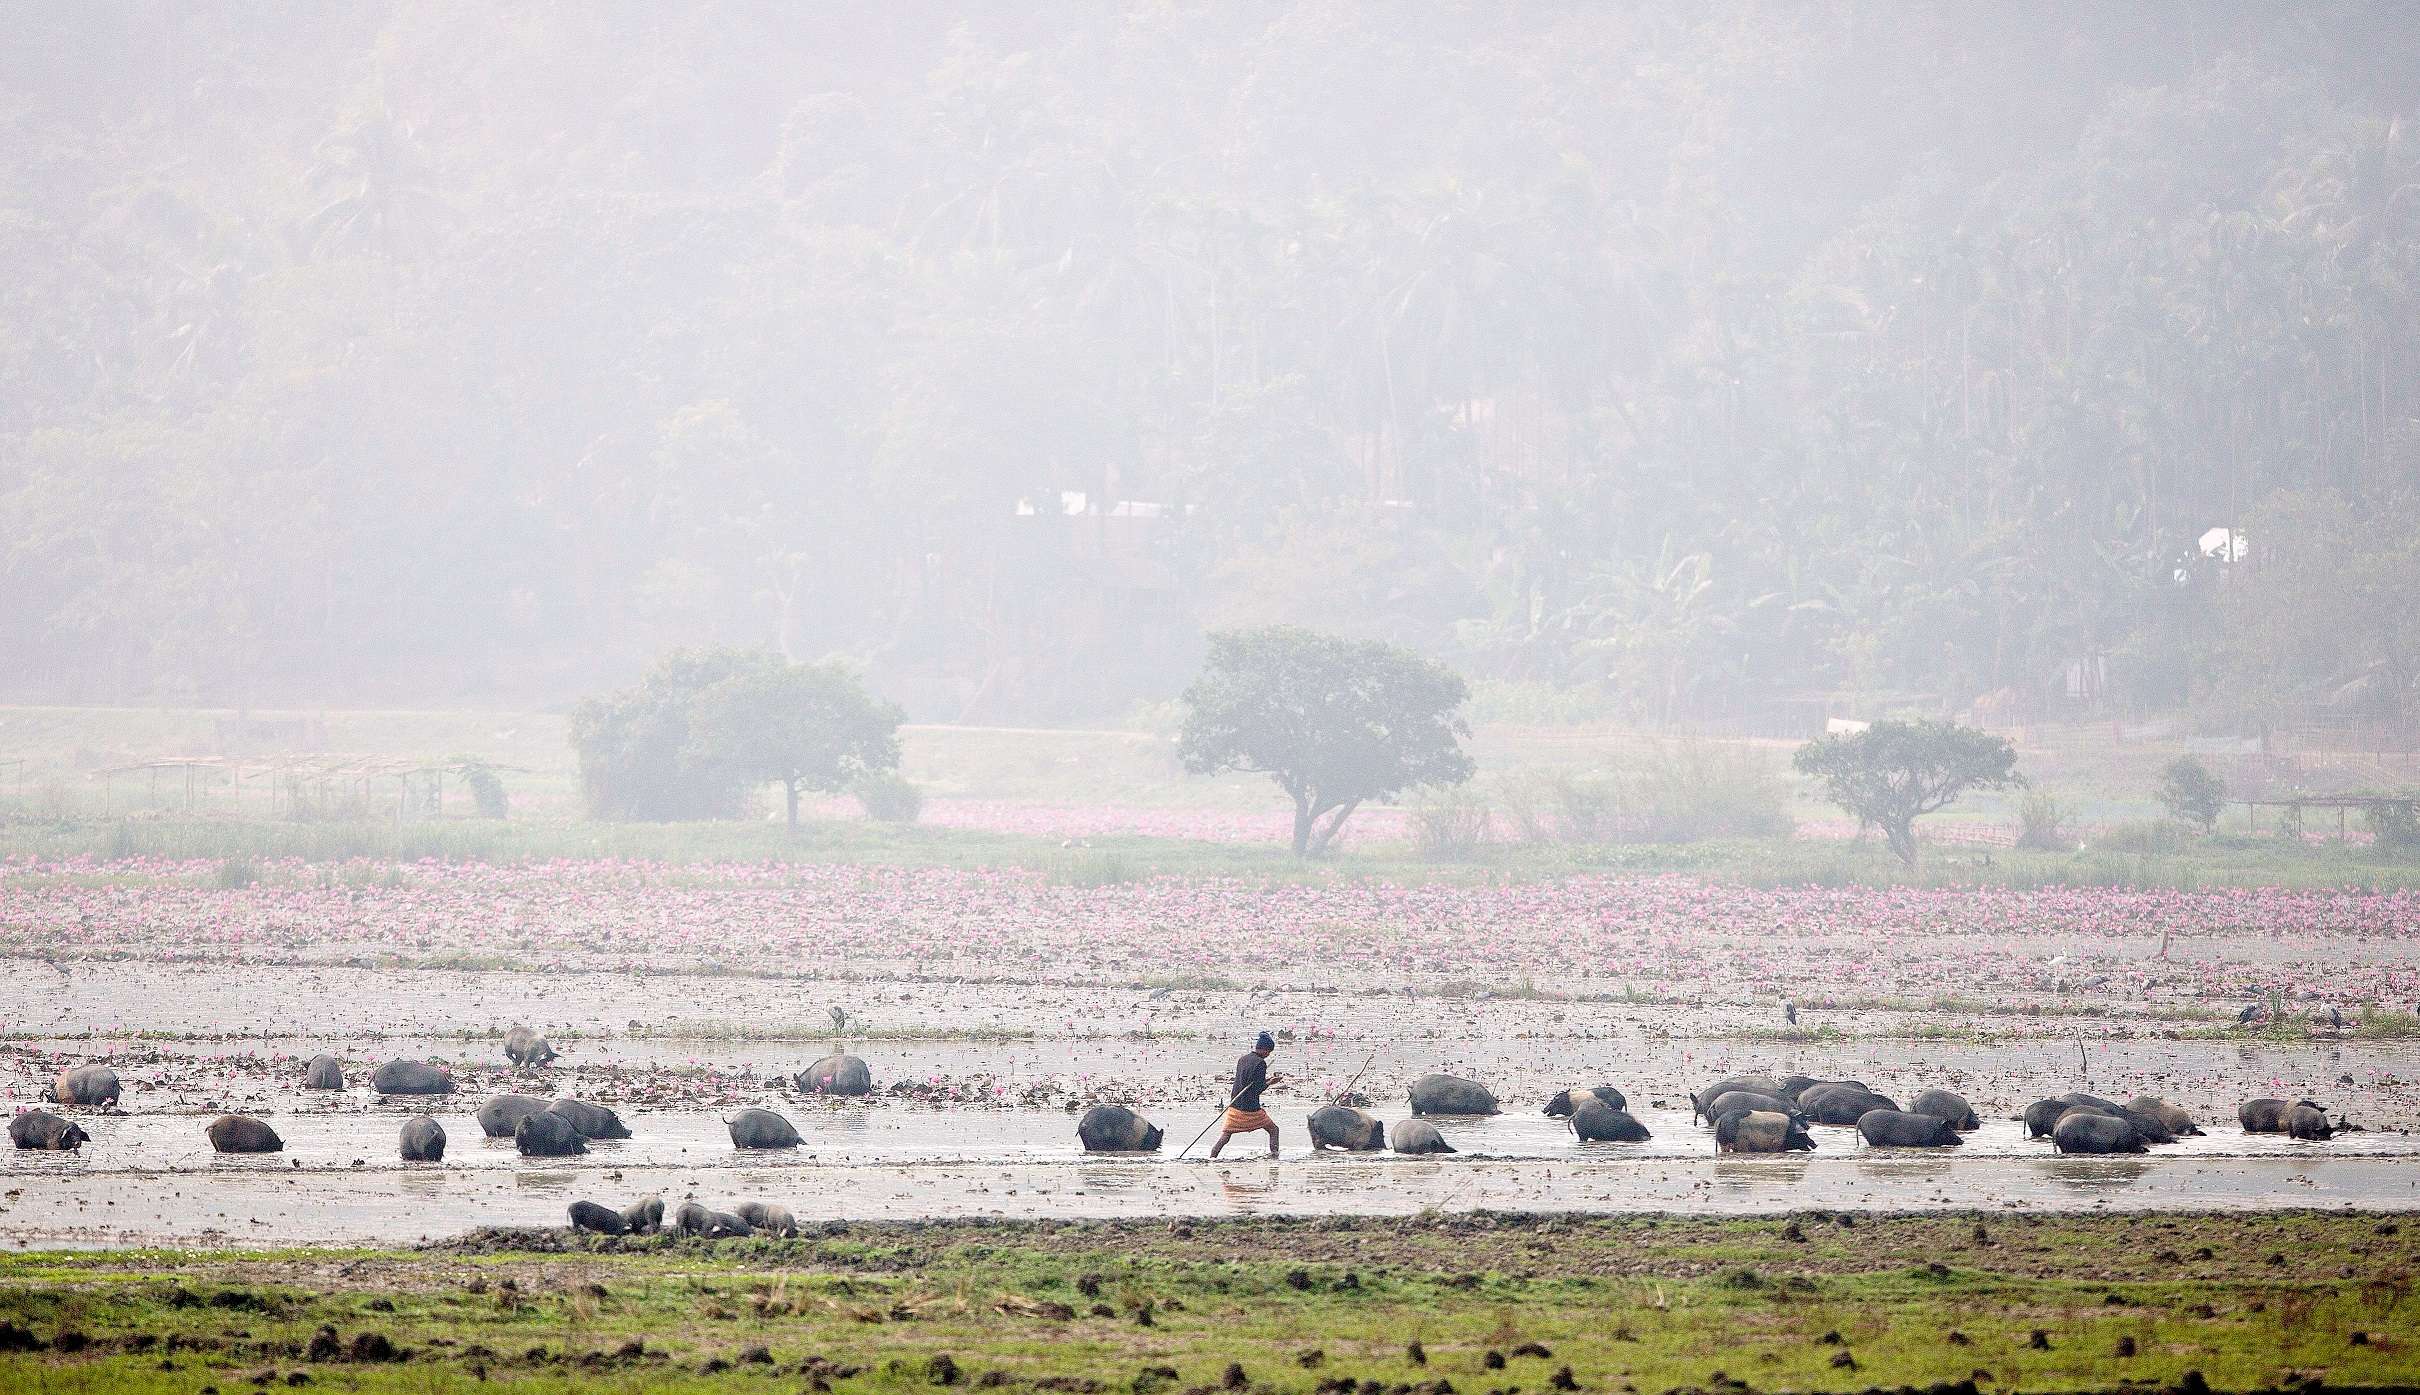 An Indian farmer grazes his pigs in a field filled with water in Chandrapur village, outskirts of Gauhati, India, Monday, Dec. 14, 2015. Agriculture is the main livelihood of about 60 percent of India's 1.2 billion people. (AP Photo/ Anupam Nath)